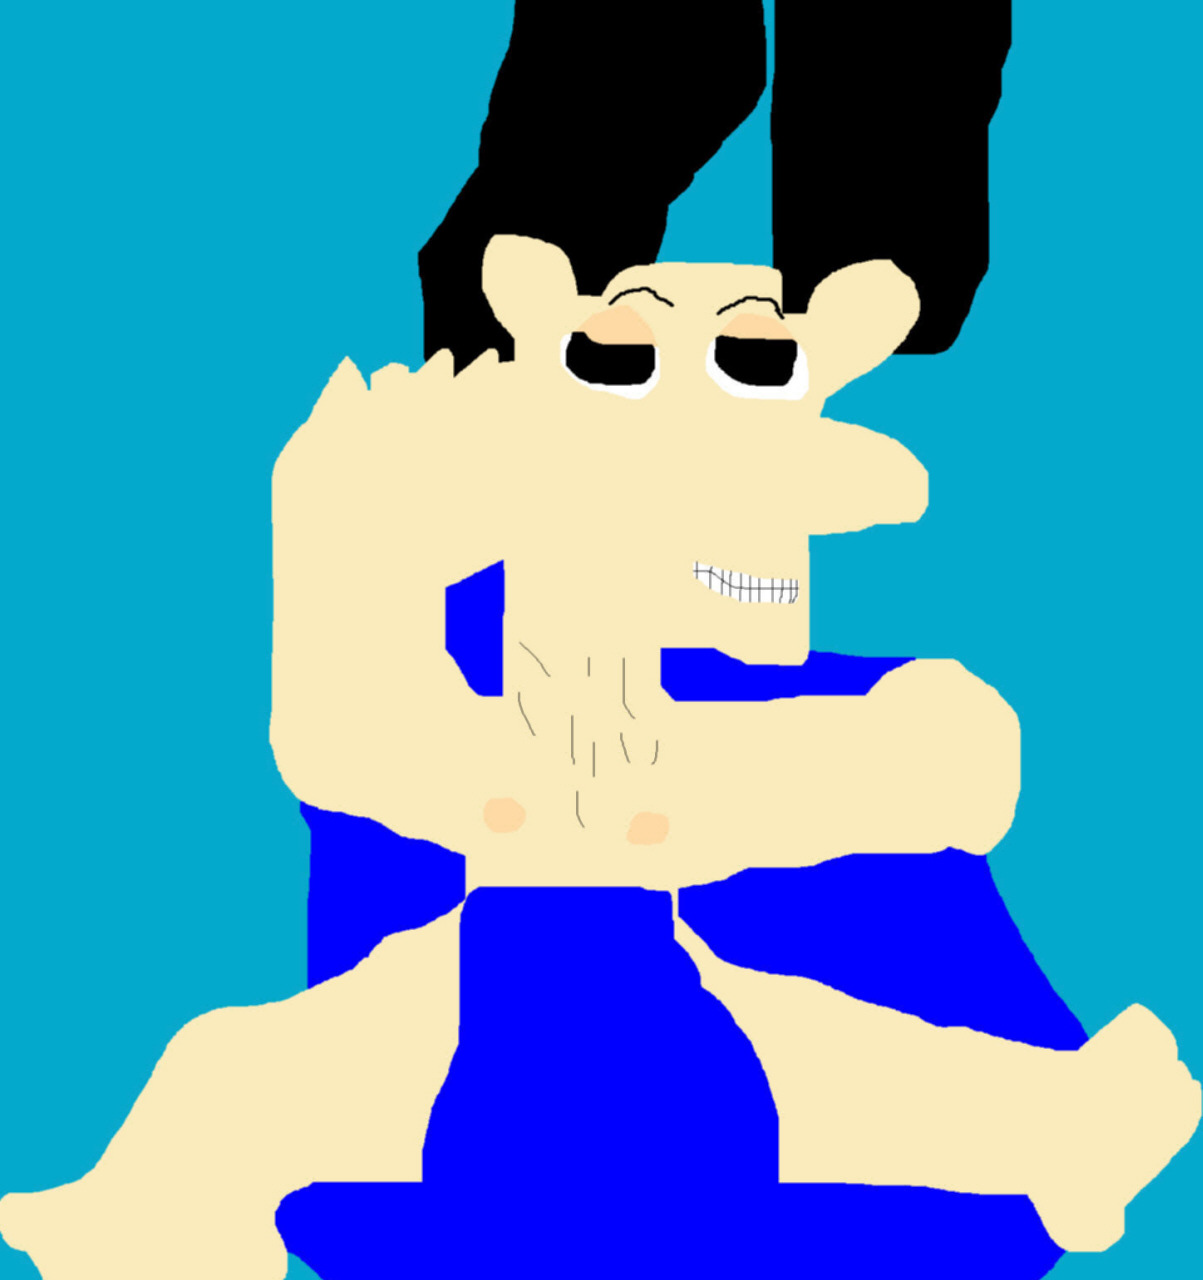 Naked Noodman Wrapped Up In A Blanket MS Paint by Falconlobo